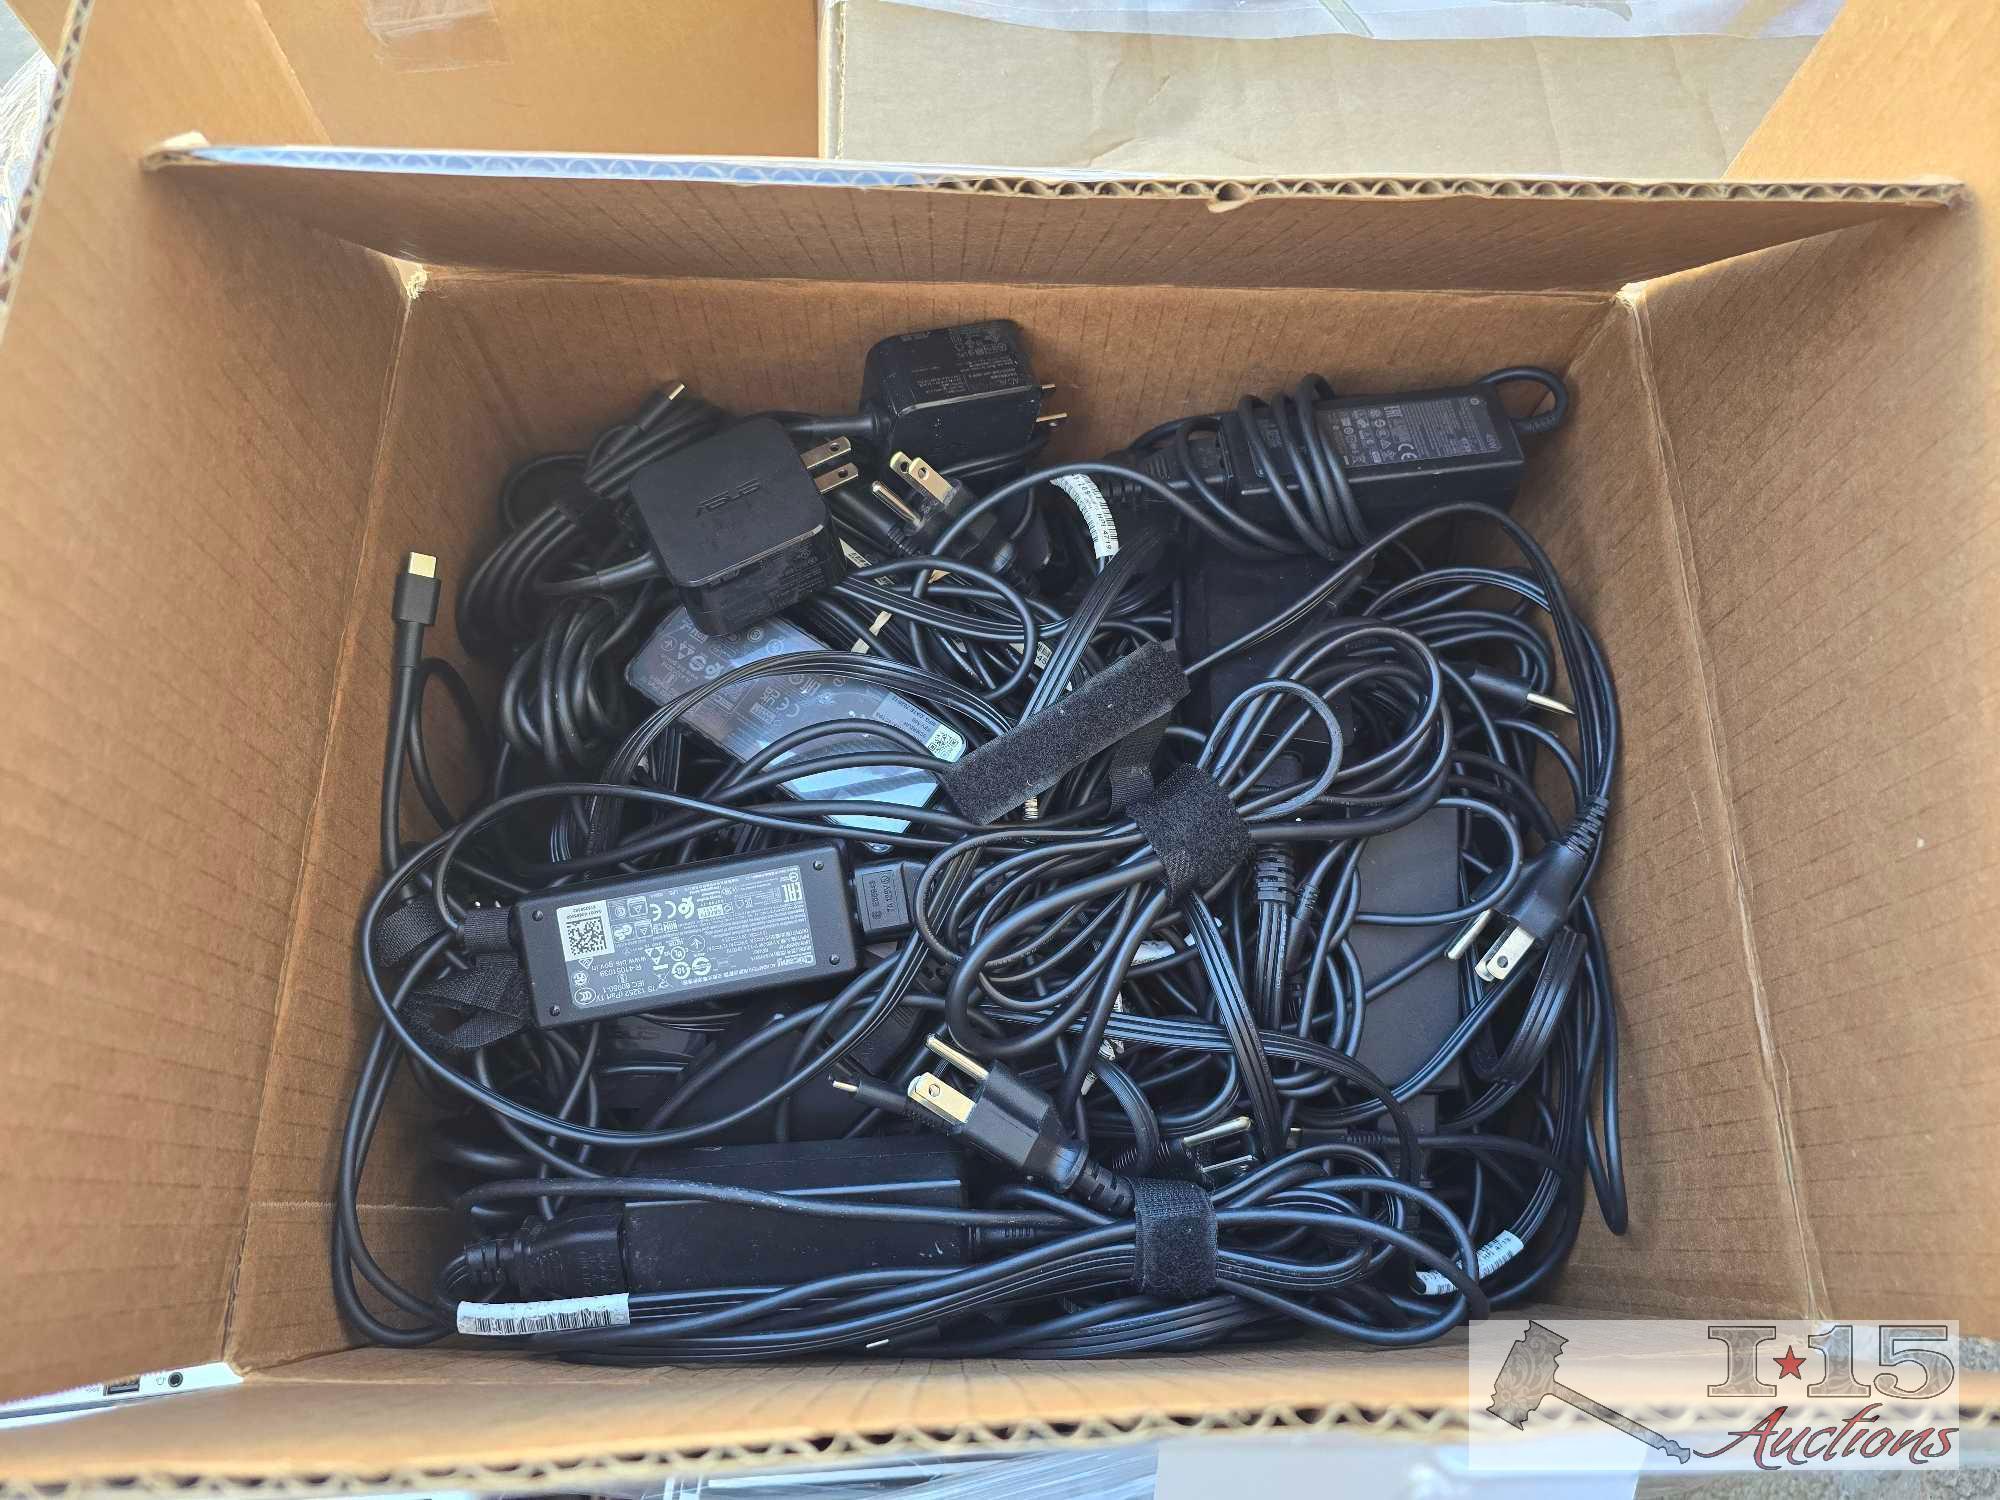 (229) HP Chromebook and Chargers